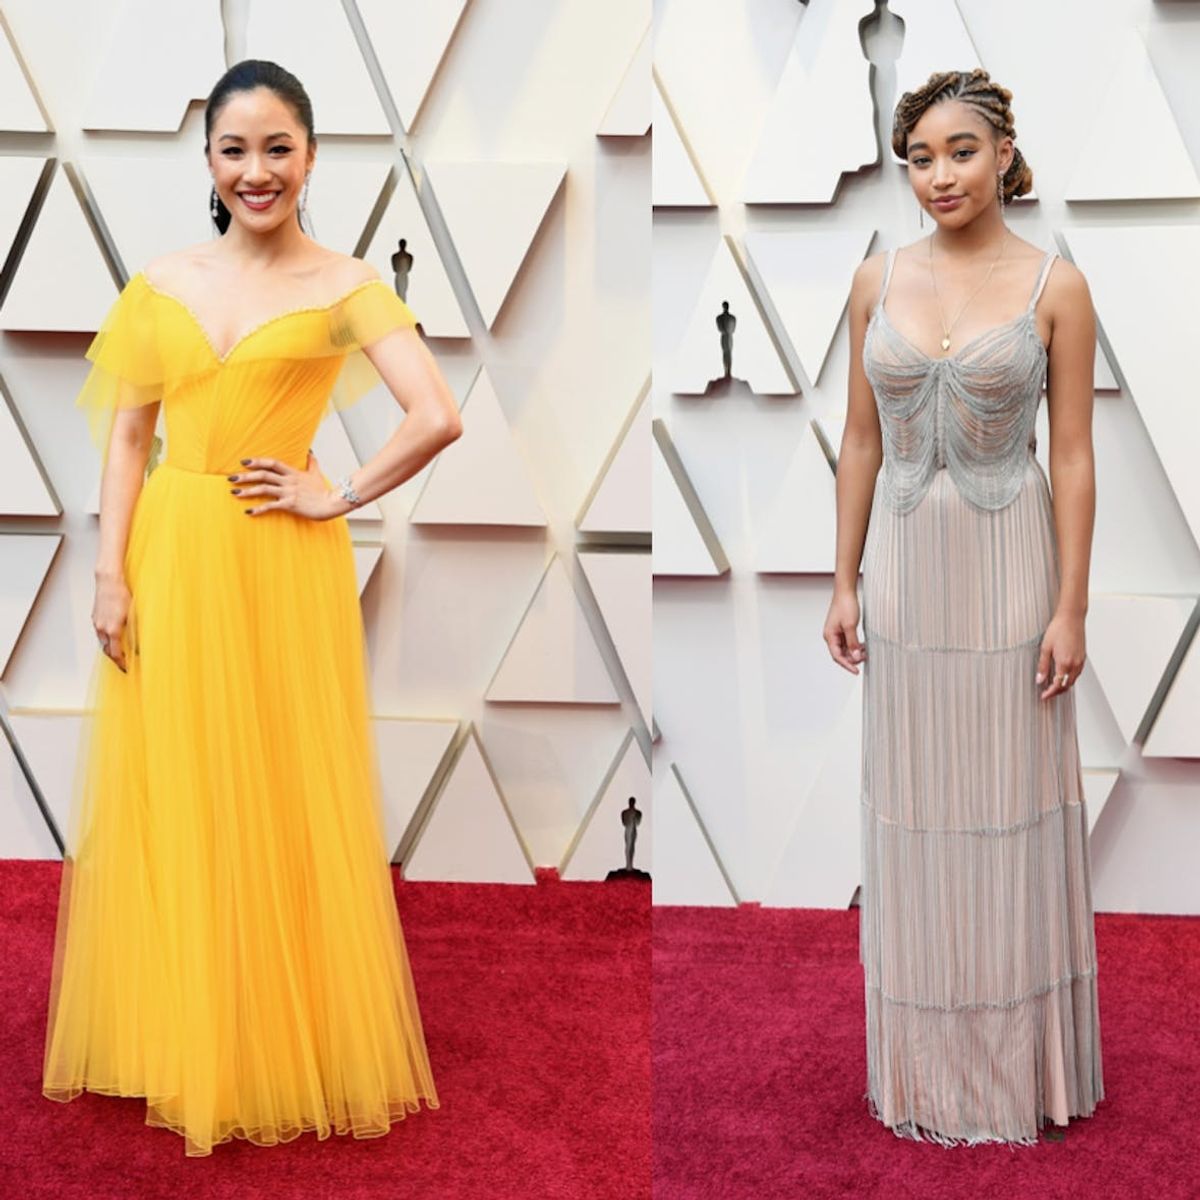 Oscars 2019: The Most Important Celebrity Red Carpet Looks from Hollywood’s Biggest Night